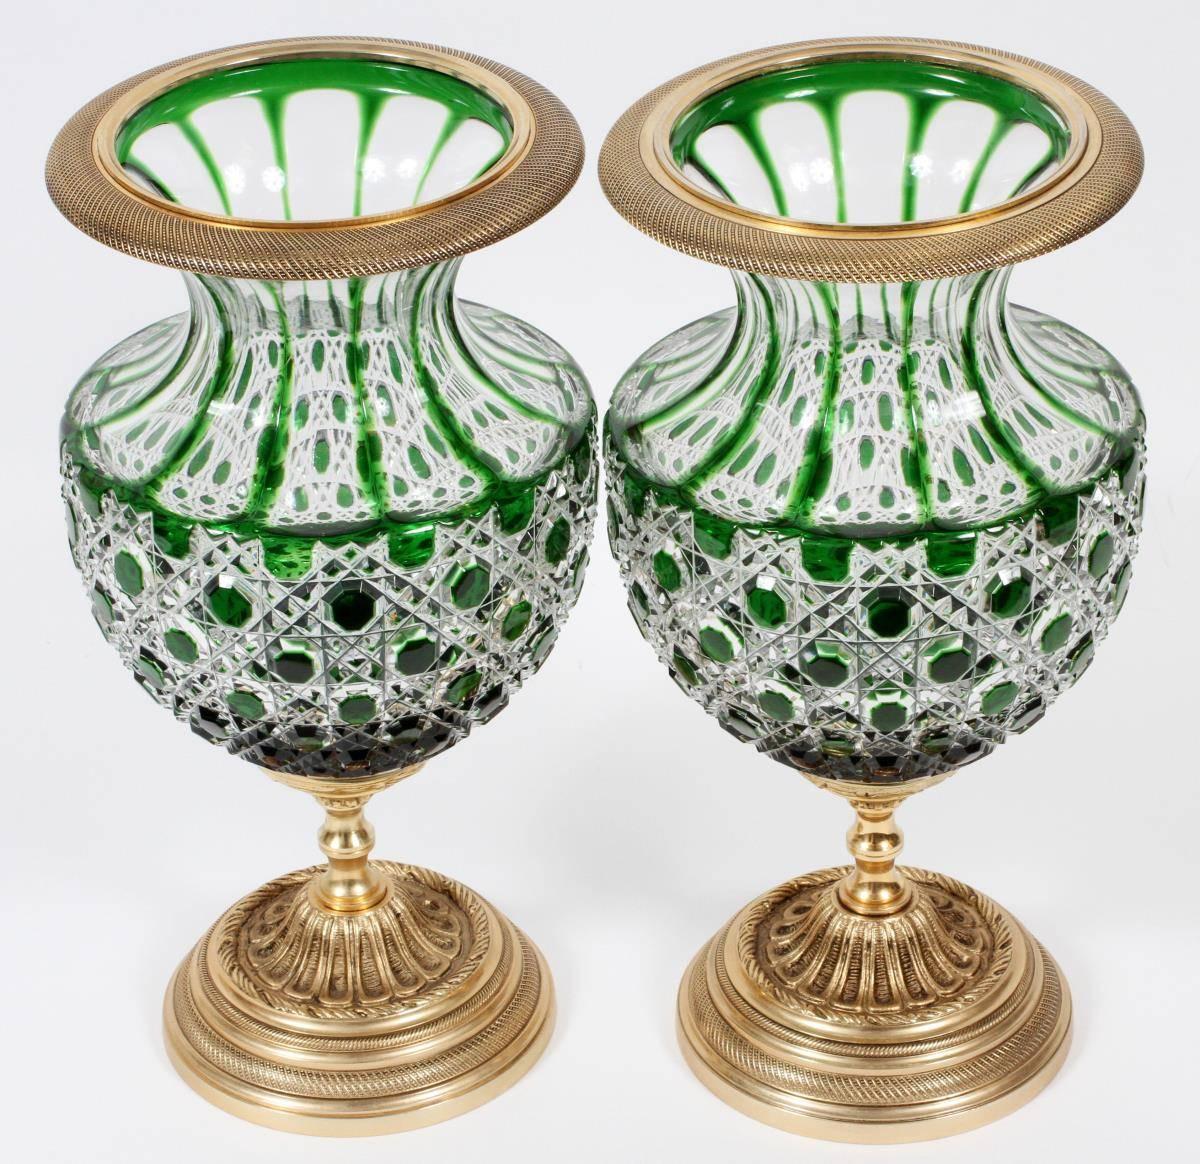 A magnificent pair of beautiful French empire hand-cut green crystal bronze centrepiece vase urns. Beautifully done with fine 24-karat gold leaf and gilt bronze and intricate scrolled detail and outstanding hand-cut ornate accent detail work.